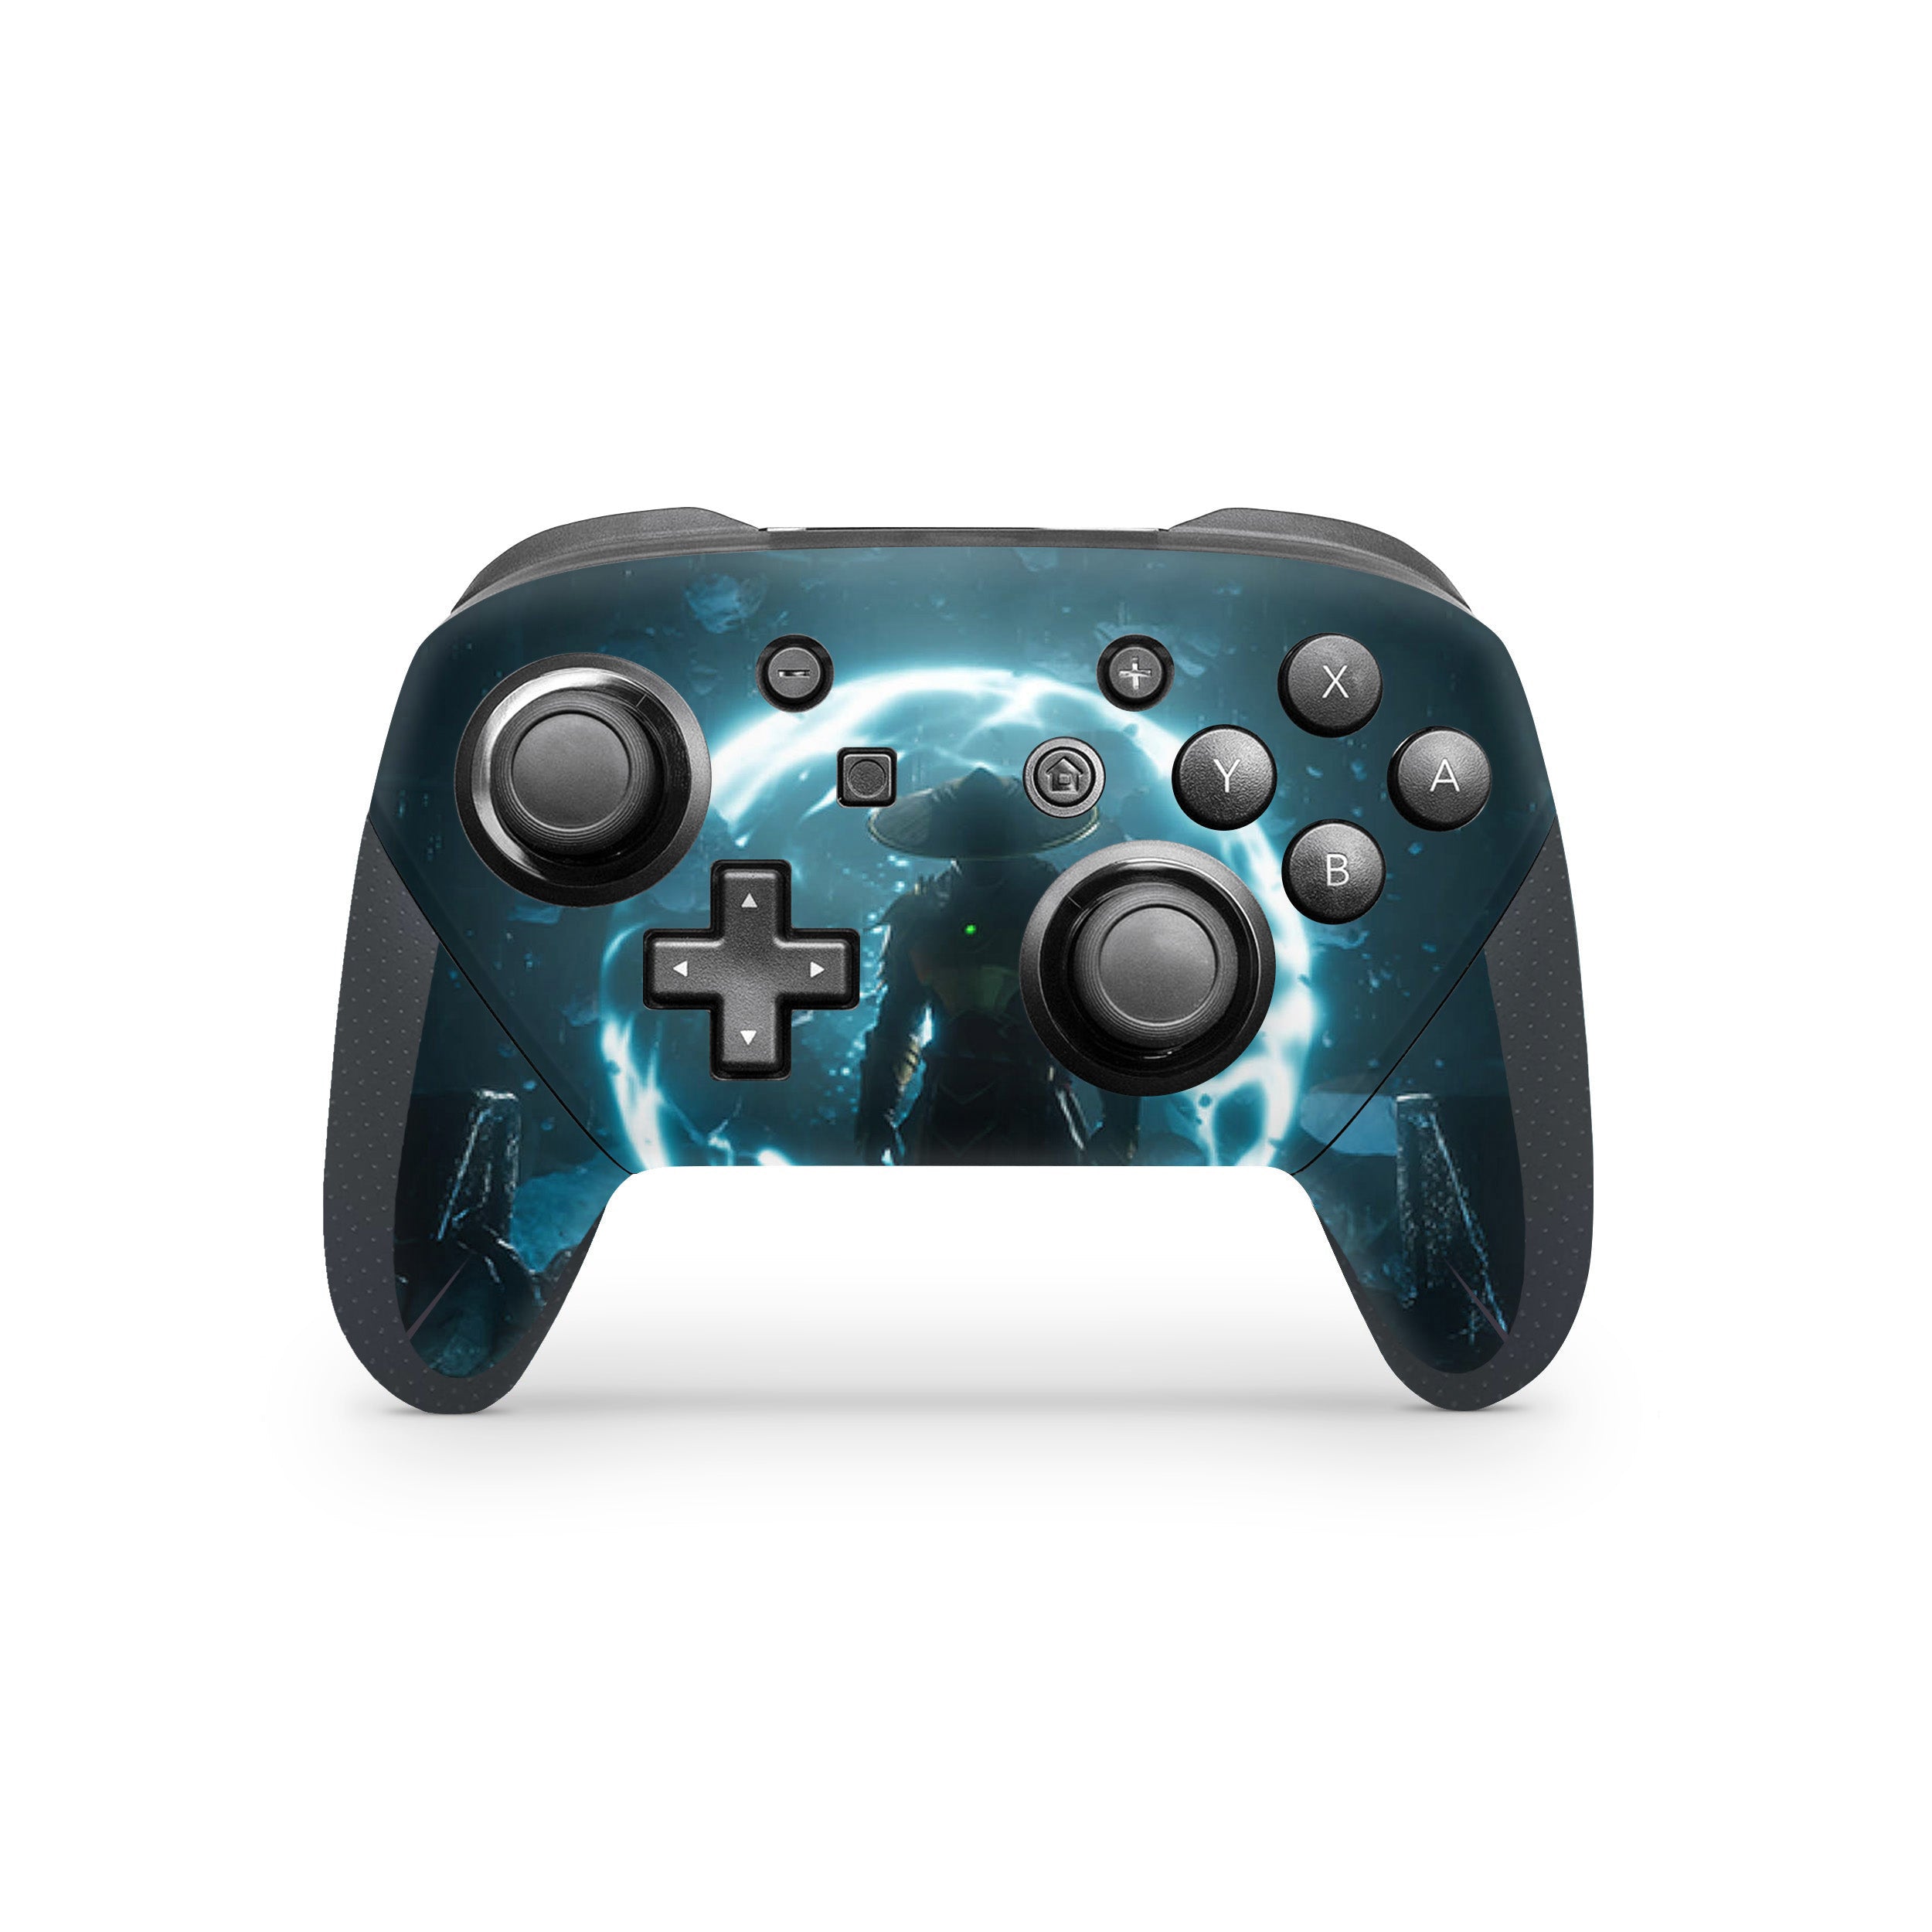 A video game skin featuring a Mortal Kombat 11 Harley Quinn design for the Switch Pro Controller.